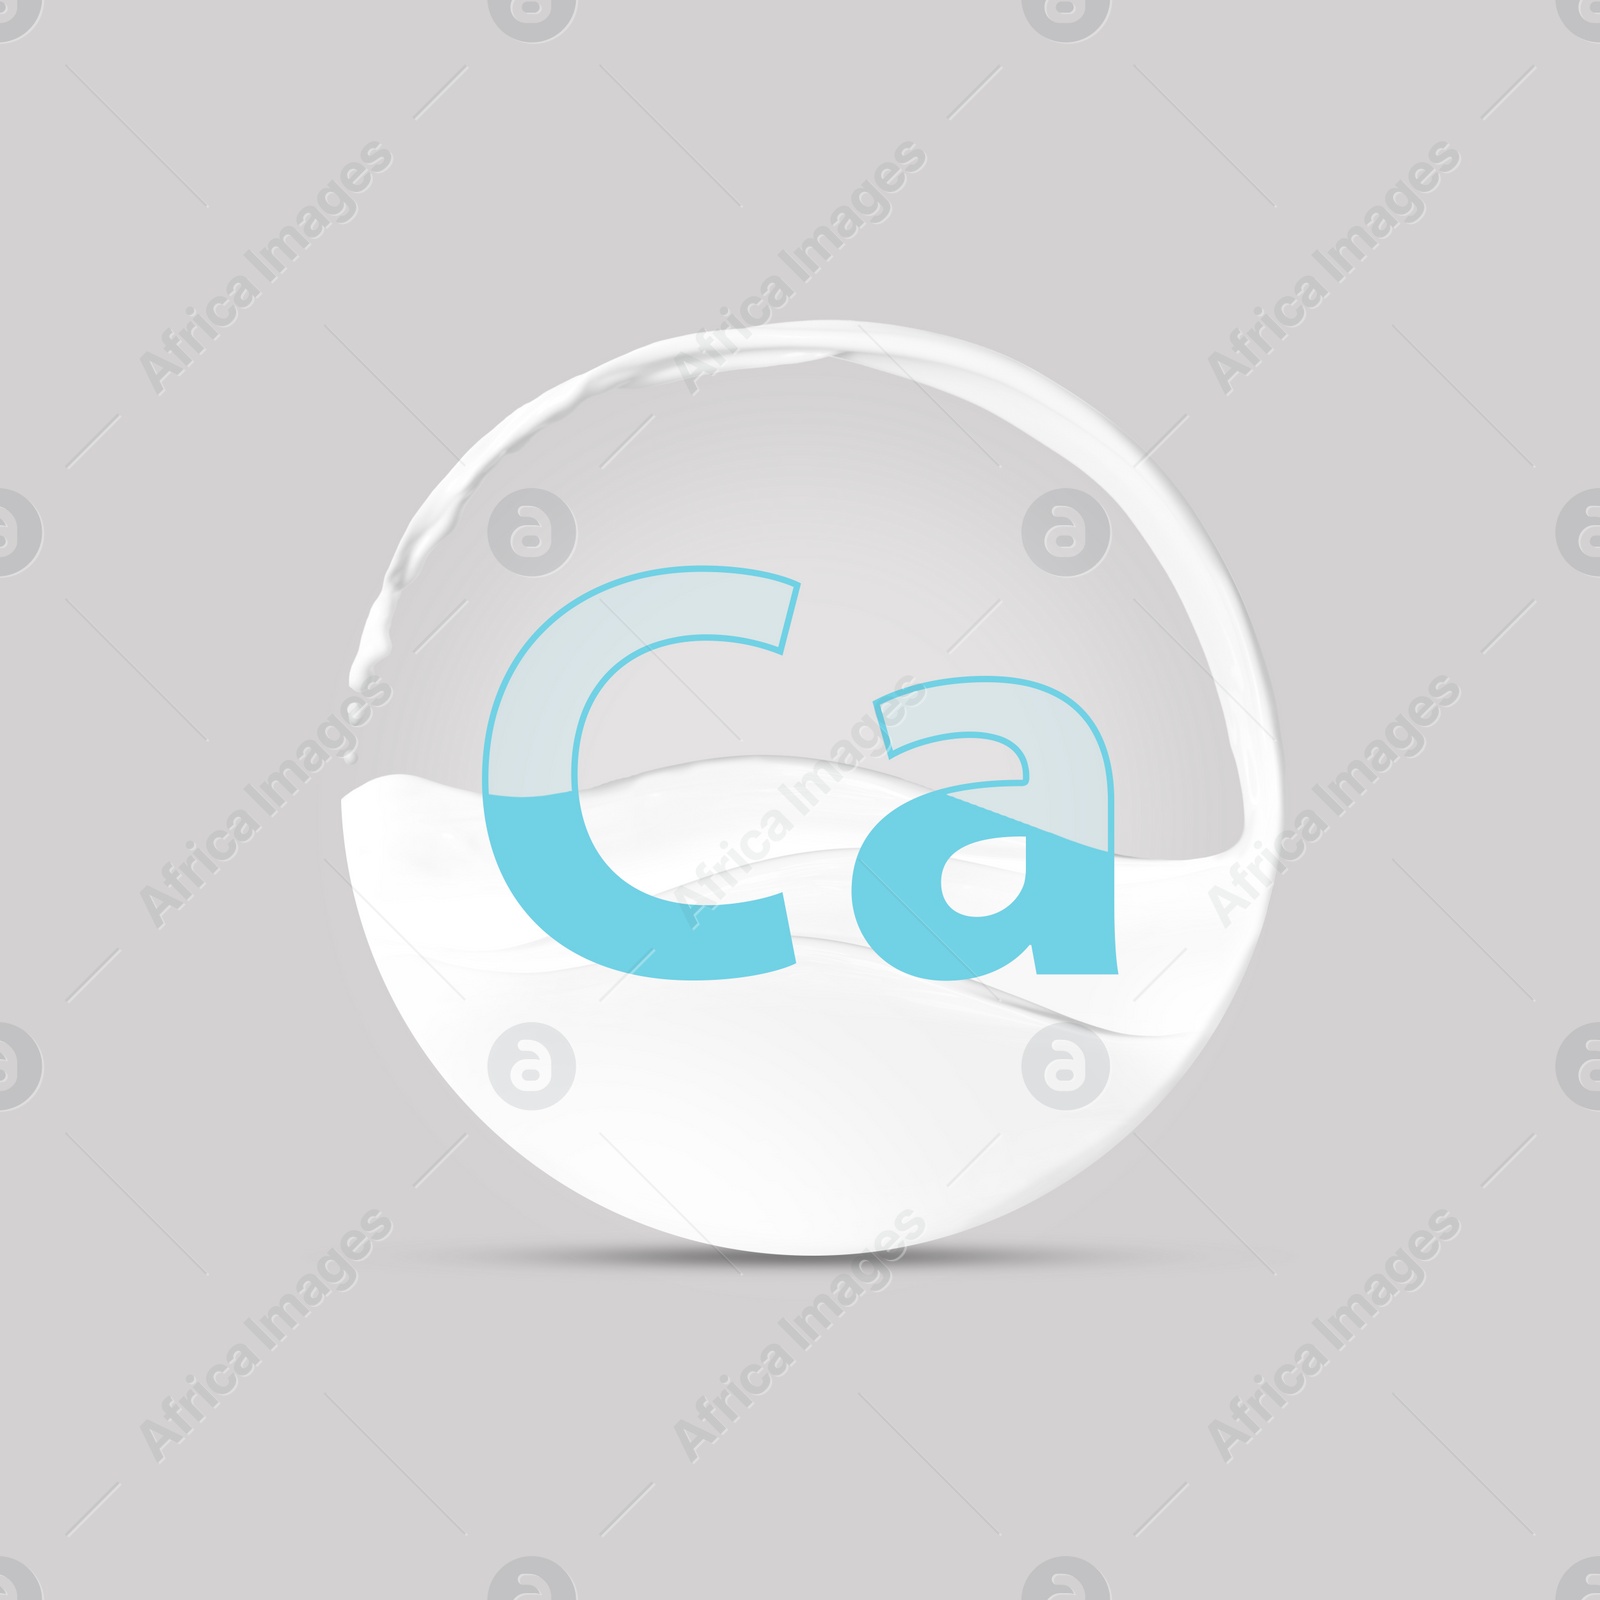 Illustration of Sphere made of splashing milk and symbol Ca on light grey background. Source of calcium